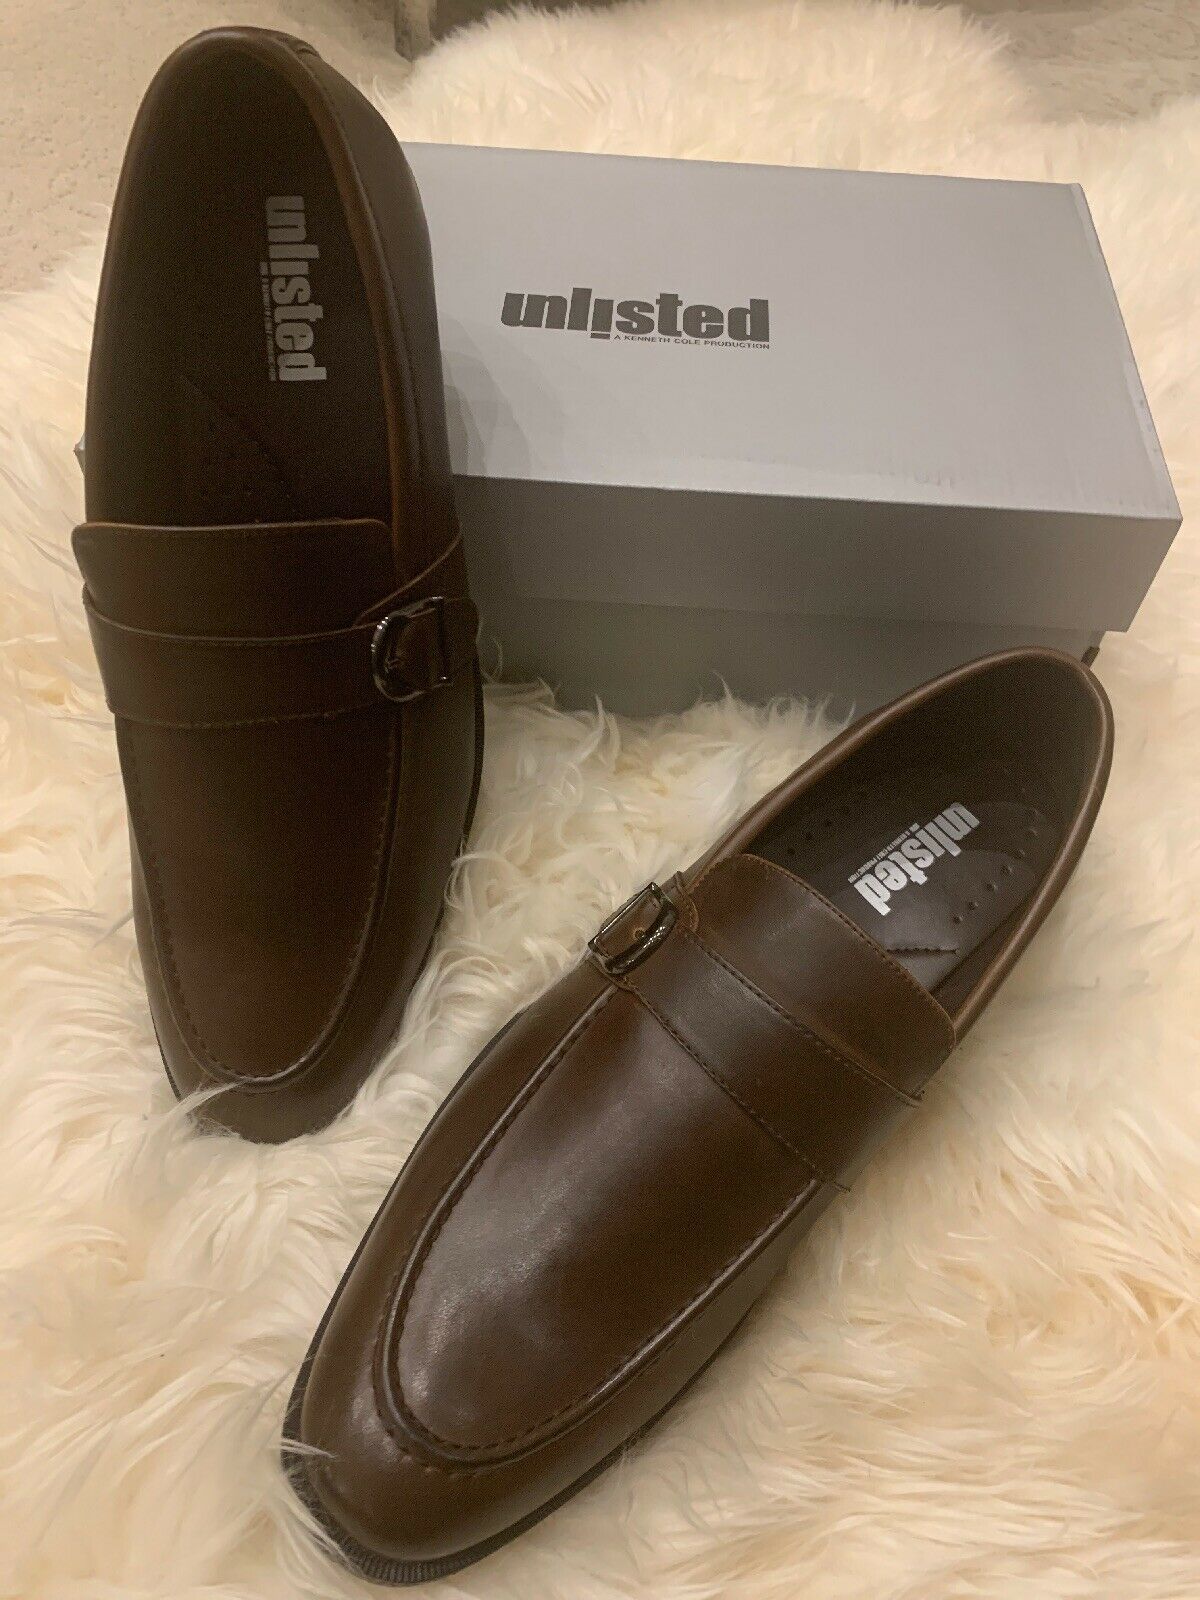 Unlisted By Kenneth Cole Men's 10.5 Brown Shoes Half Time Show Slip On Loafers